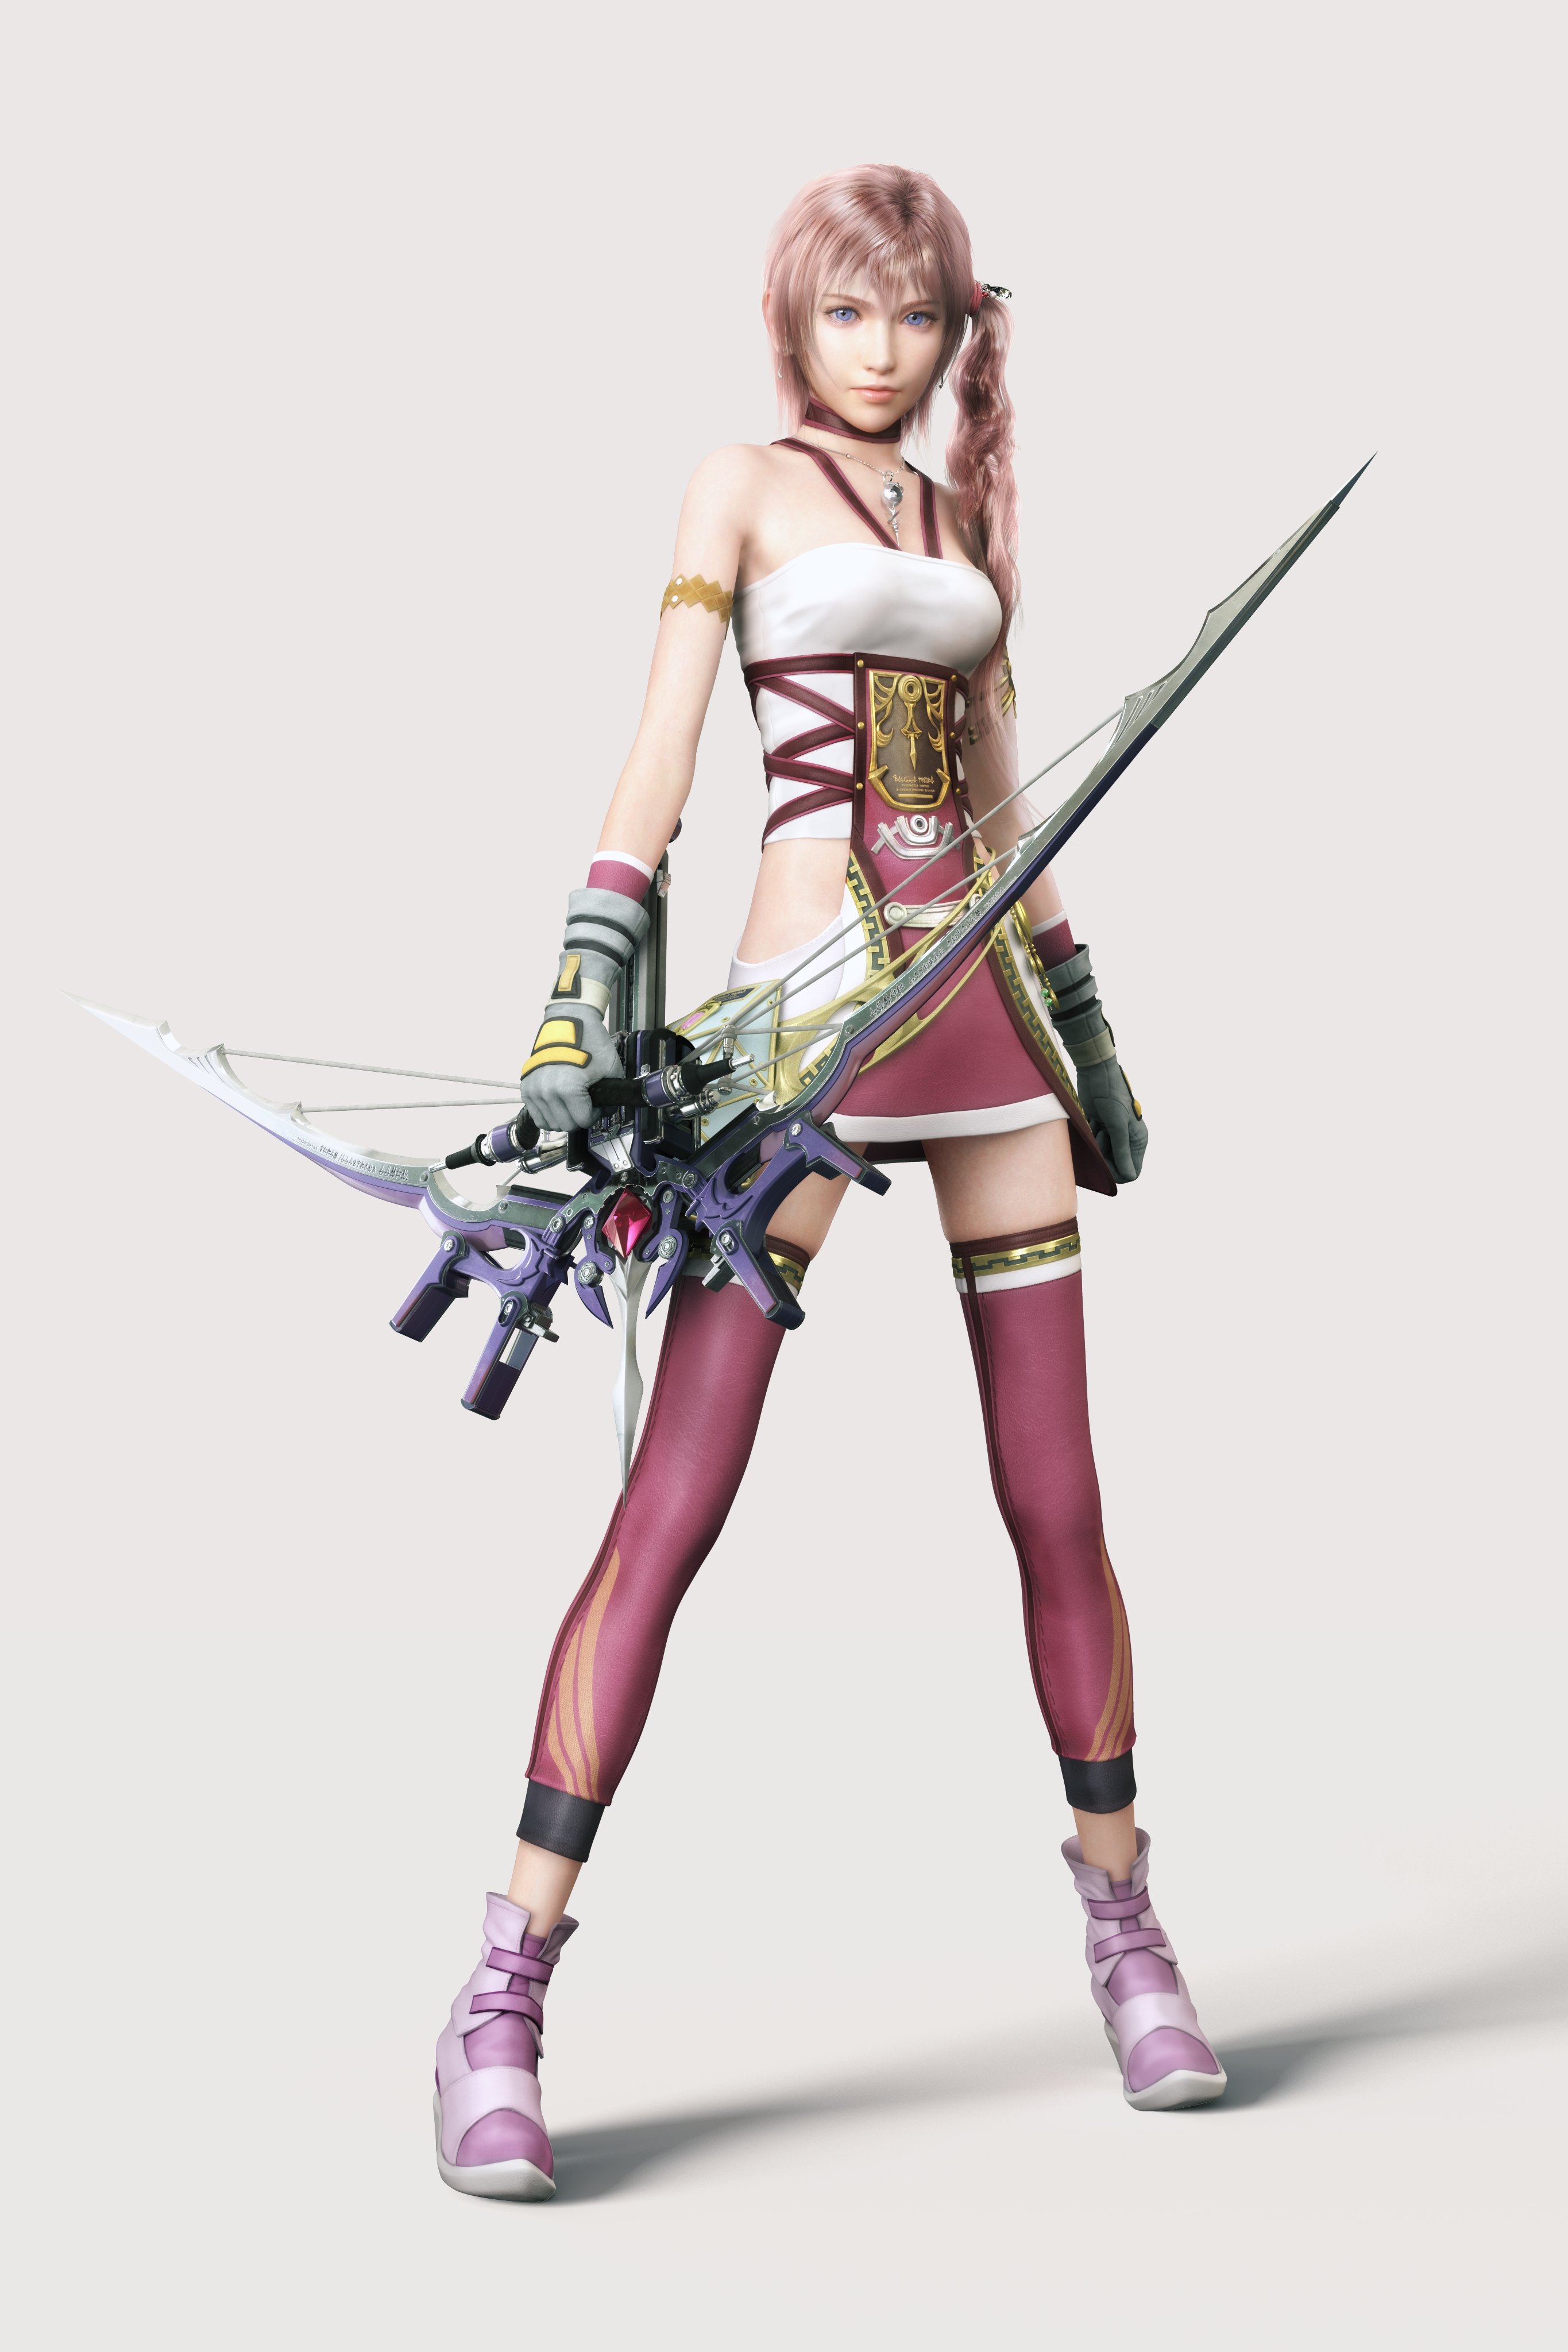 General 2730x4095 Final Fantasy XIII Serah Farron portrait display video games sword video game girls weapon video game characters simple background minimalism white background Square Enix